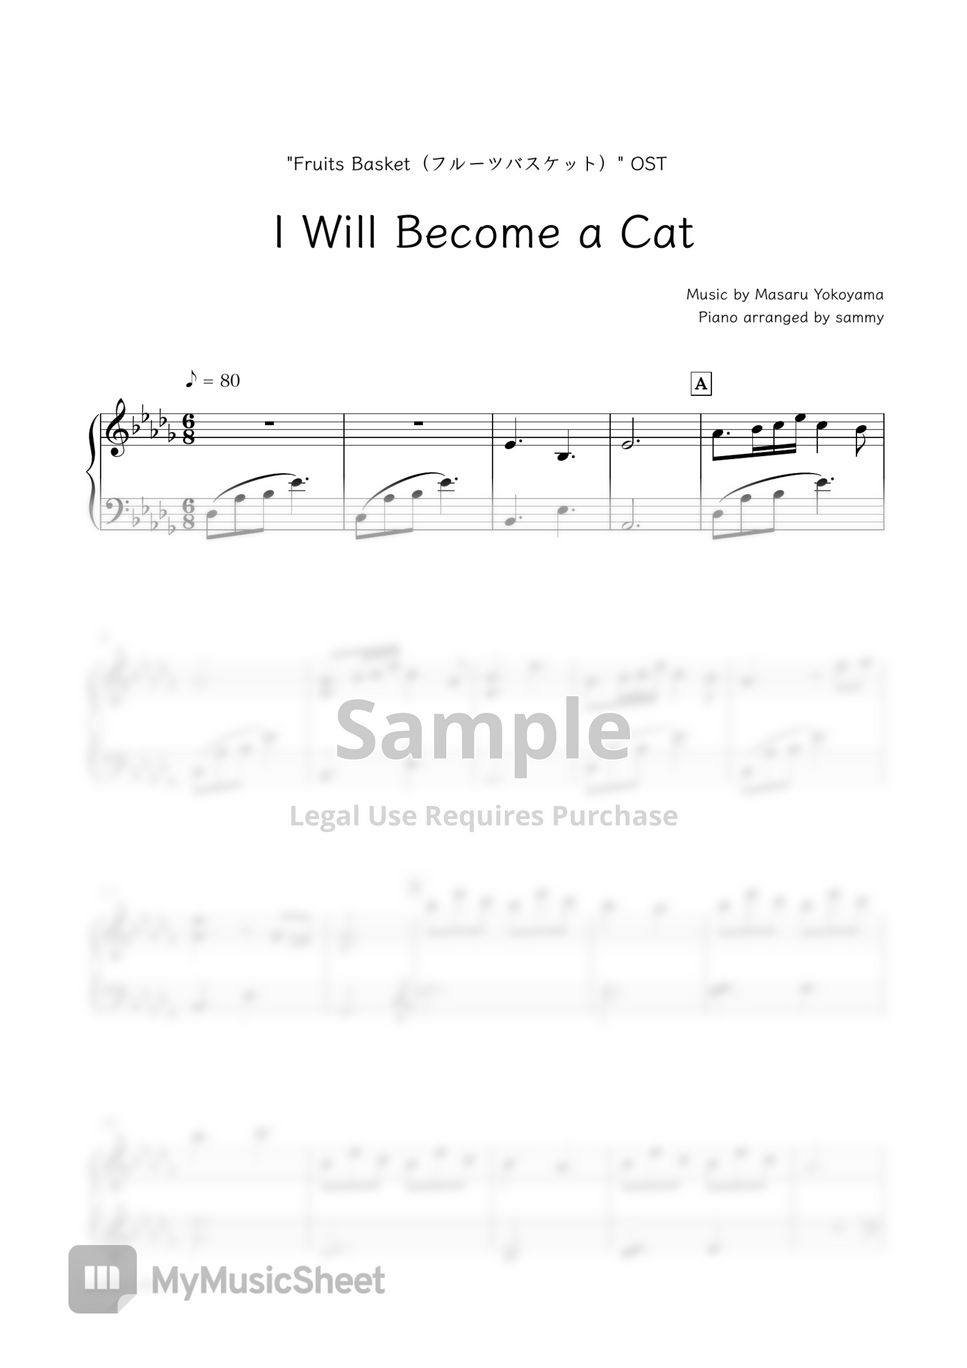 “Fruits Basket（フルーツバスケット）” OST - I Will Become a Cat by sammy